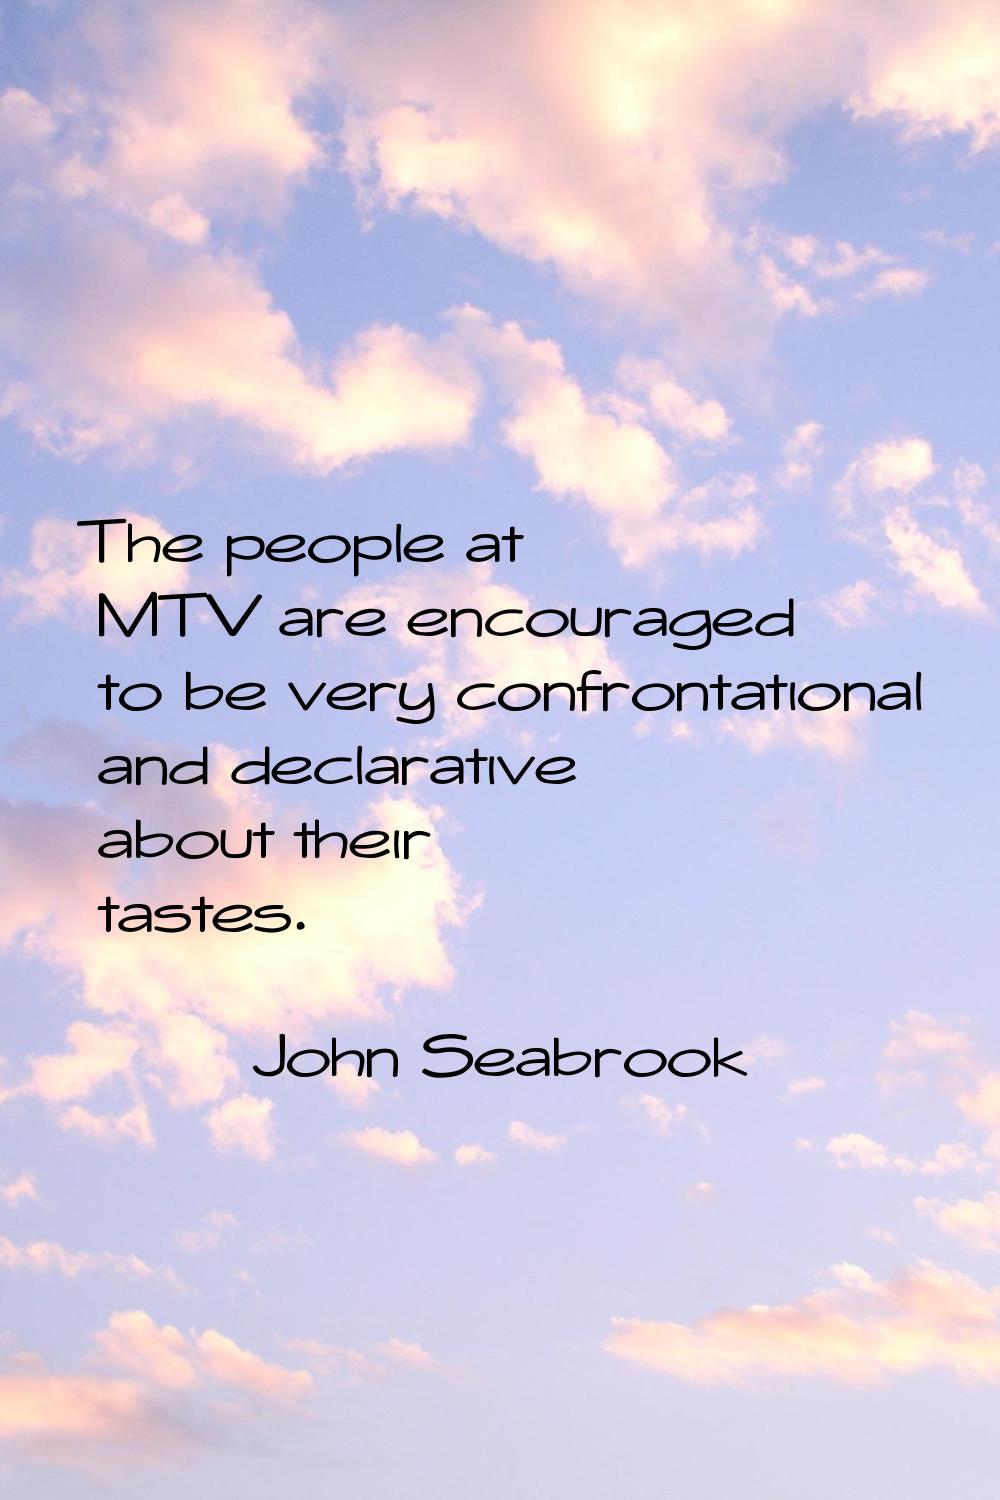 The people at MTV are encouraged to be very confrontational and declarative about their tastes.